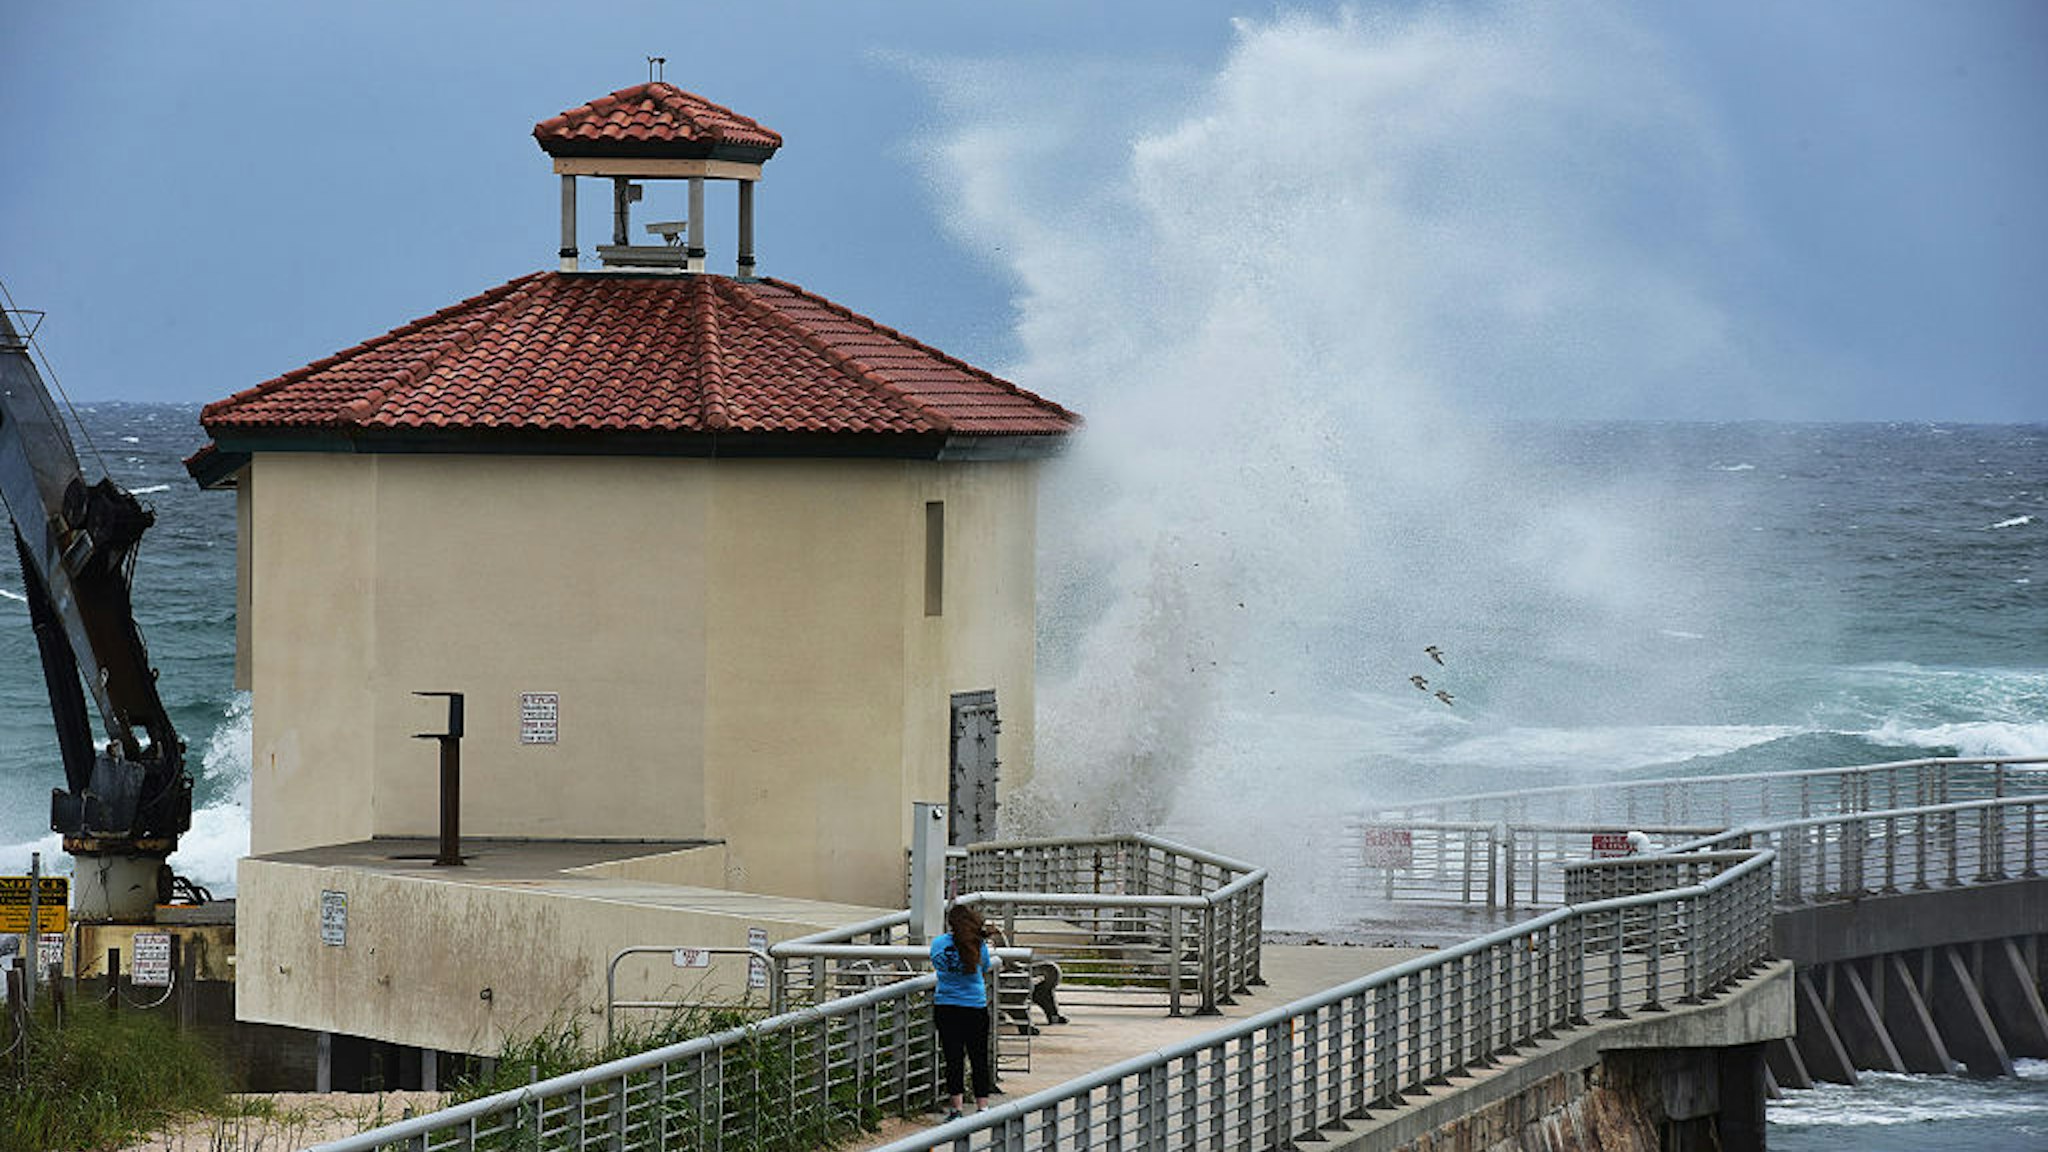 A woman takes pictures as Hurricane Matthew lashes the Boynton Beach inlet with high winds and waves as it makes its way toward South Florida Thursday, Oct. 6, 2016 in Boynton Beach, Fla.